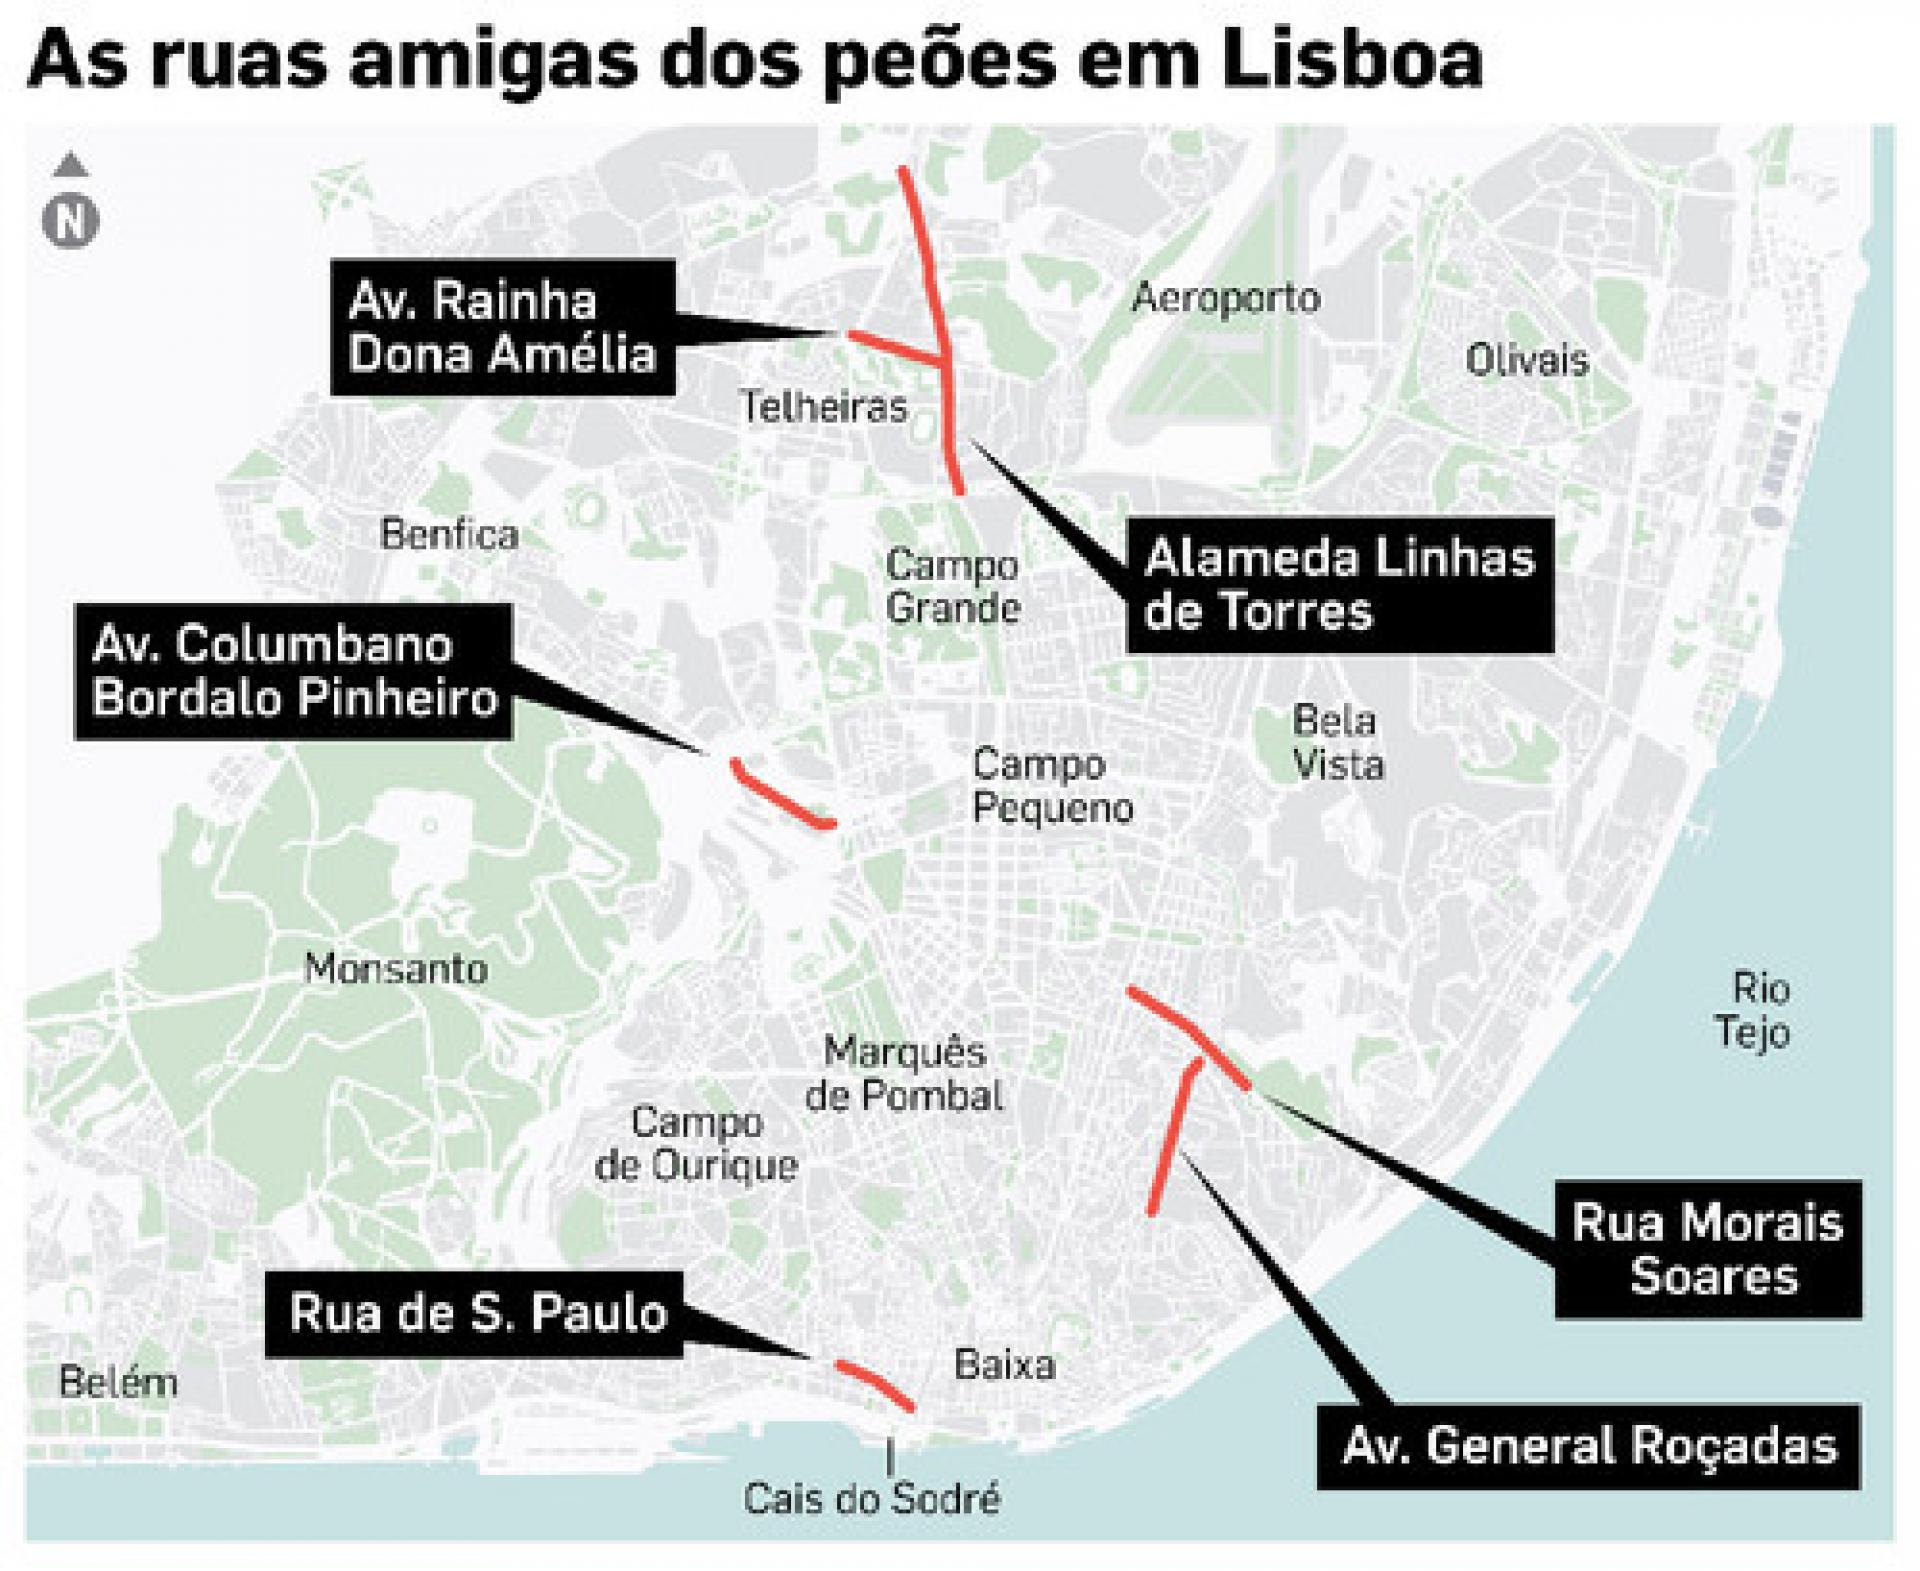 Ateliermob is developing projects of several critical areas in the eastern part of Lisbon with the team of the Pedestrian Accessibility Plan of Lisbon.